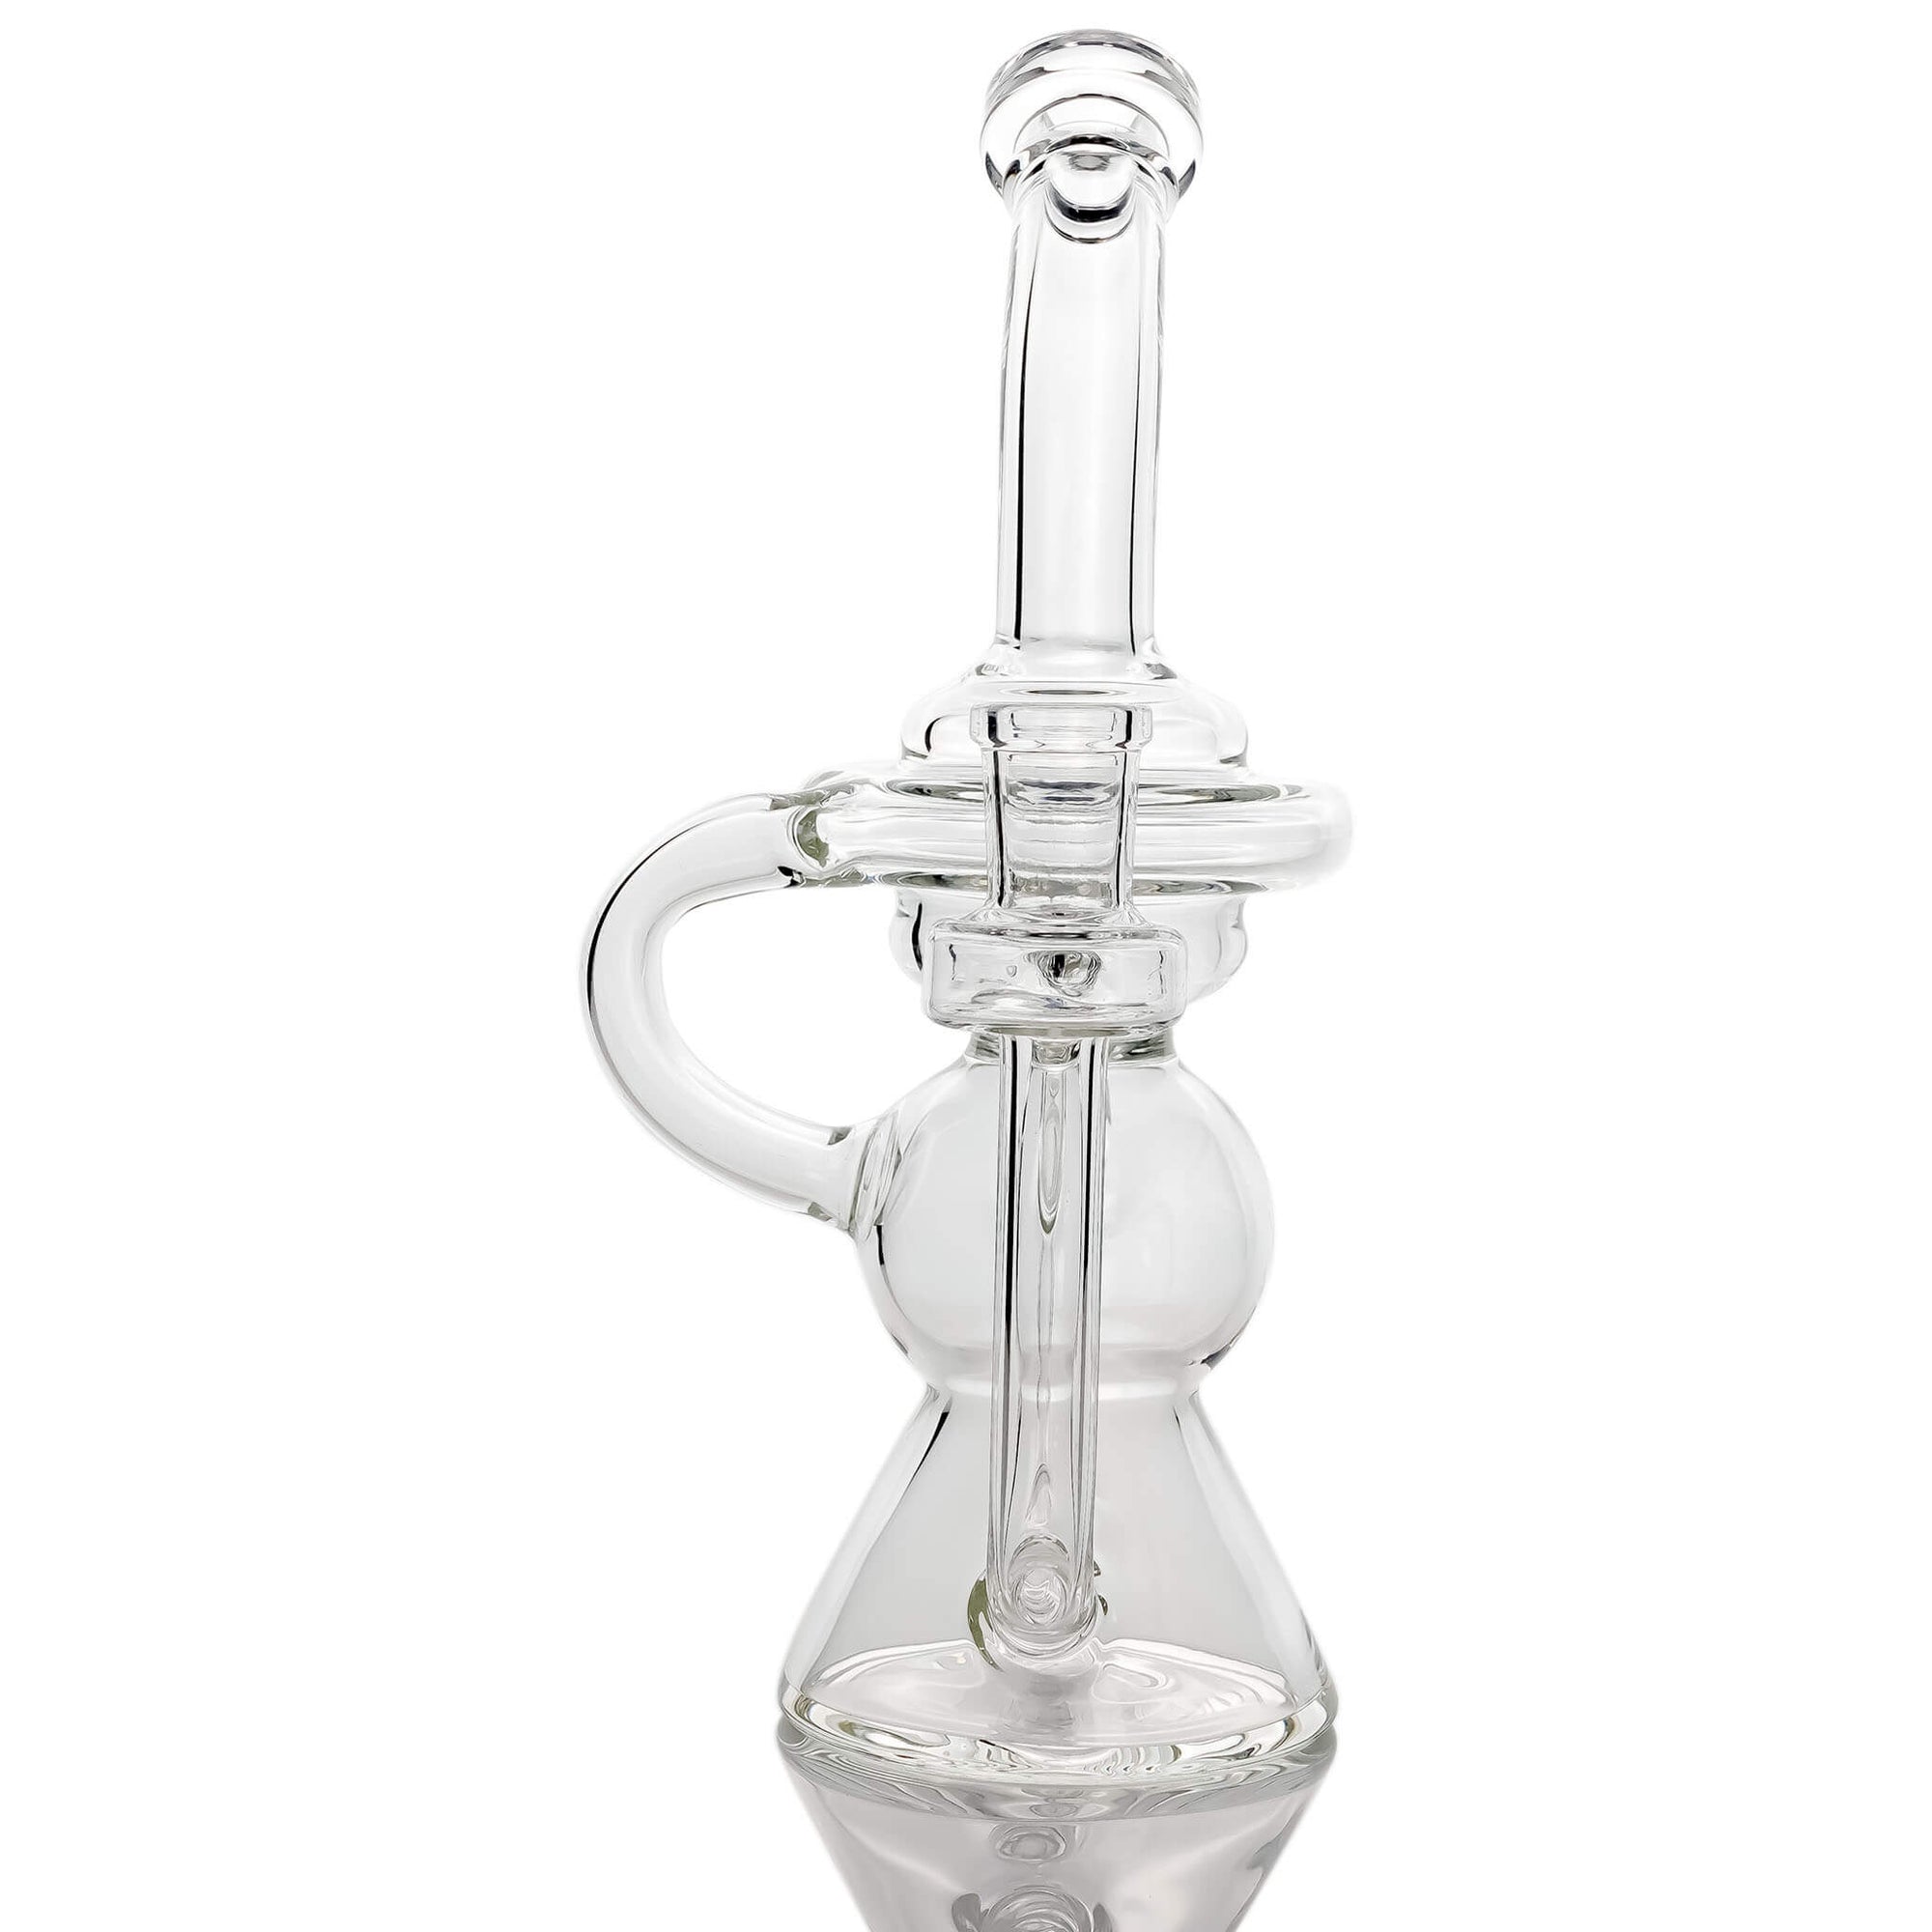 Vornadic Klein Recycler Dab Rig | Front Profile View | the dabbing specialists